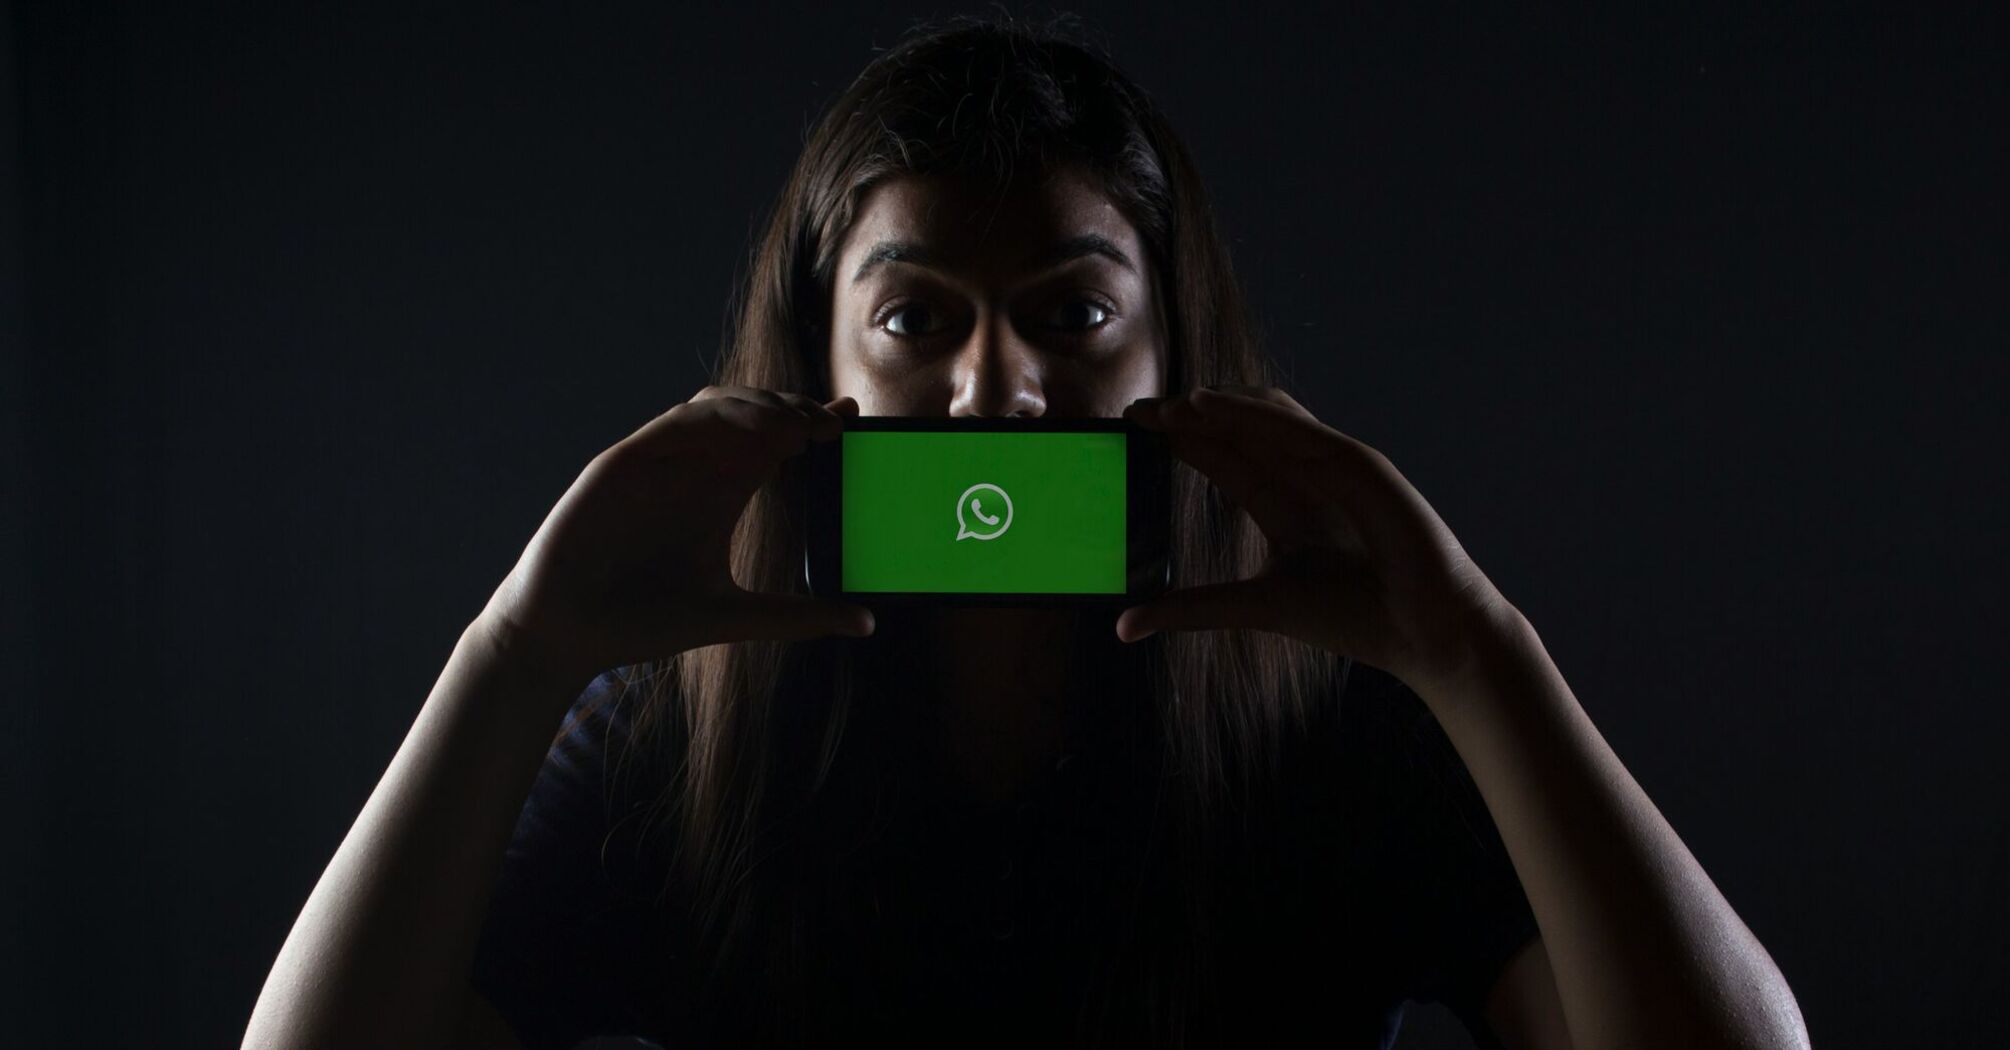 A person holding a smartphone horizontally in front of their face, displaying the WhatsApp logo on the screen, with a dark background